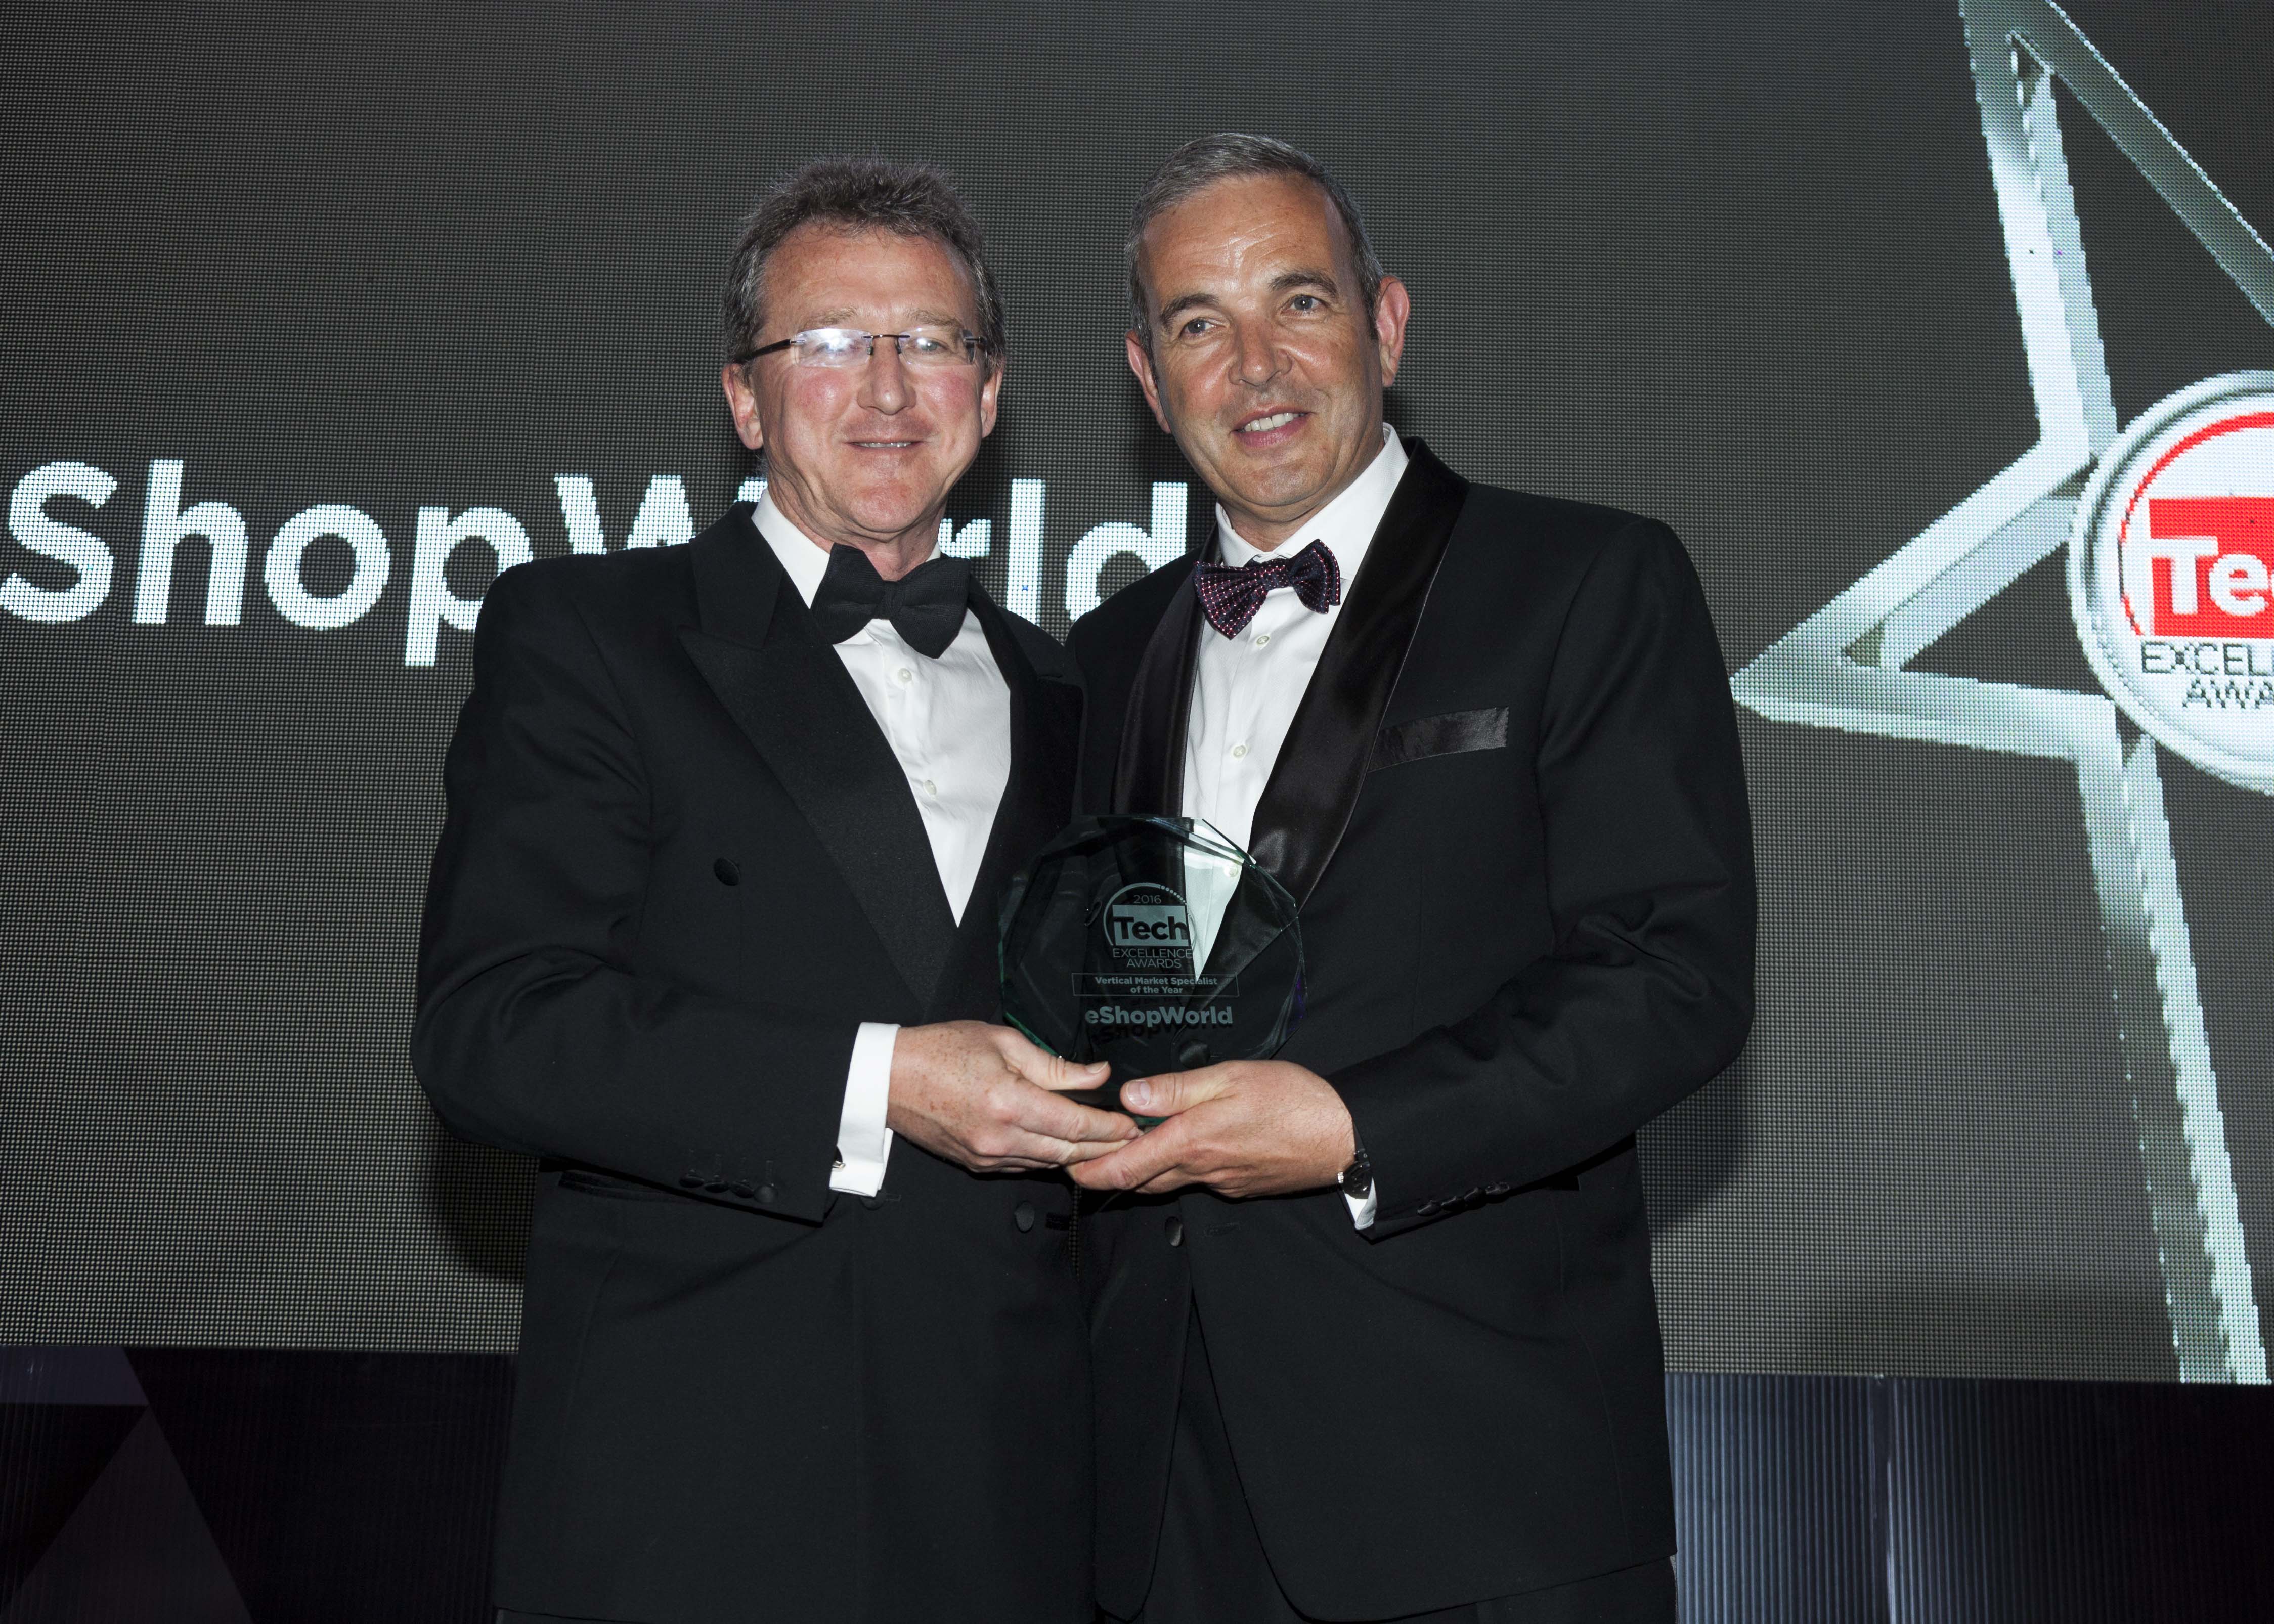 eShopWorld CEO Tommy Kelly receives the Award from Mediateam MD Frank Quinn